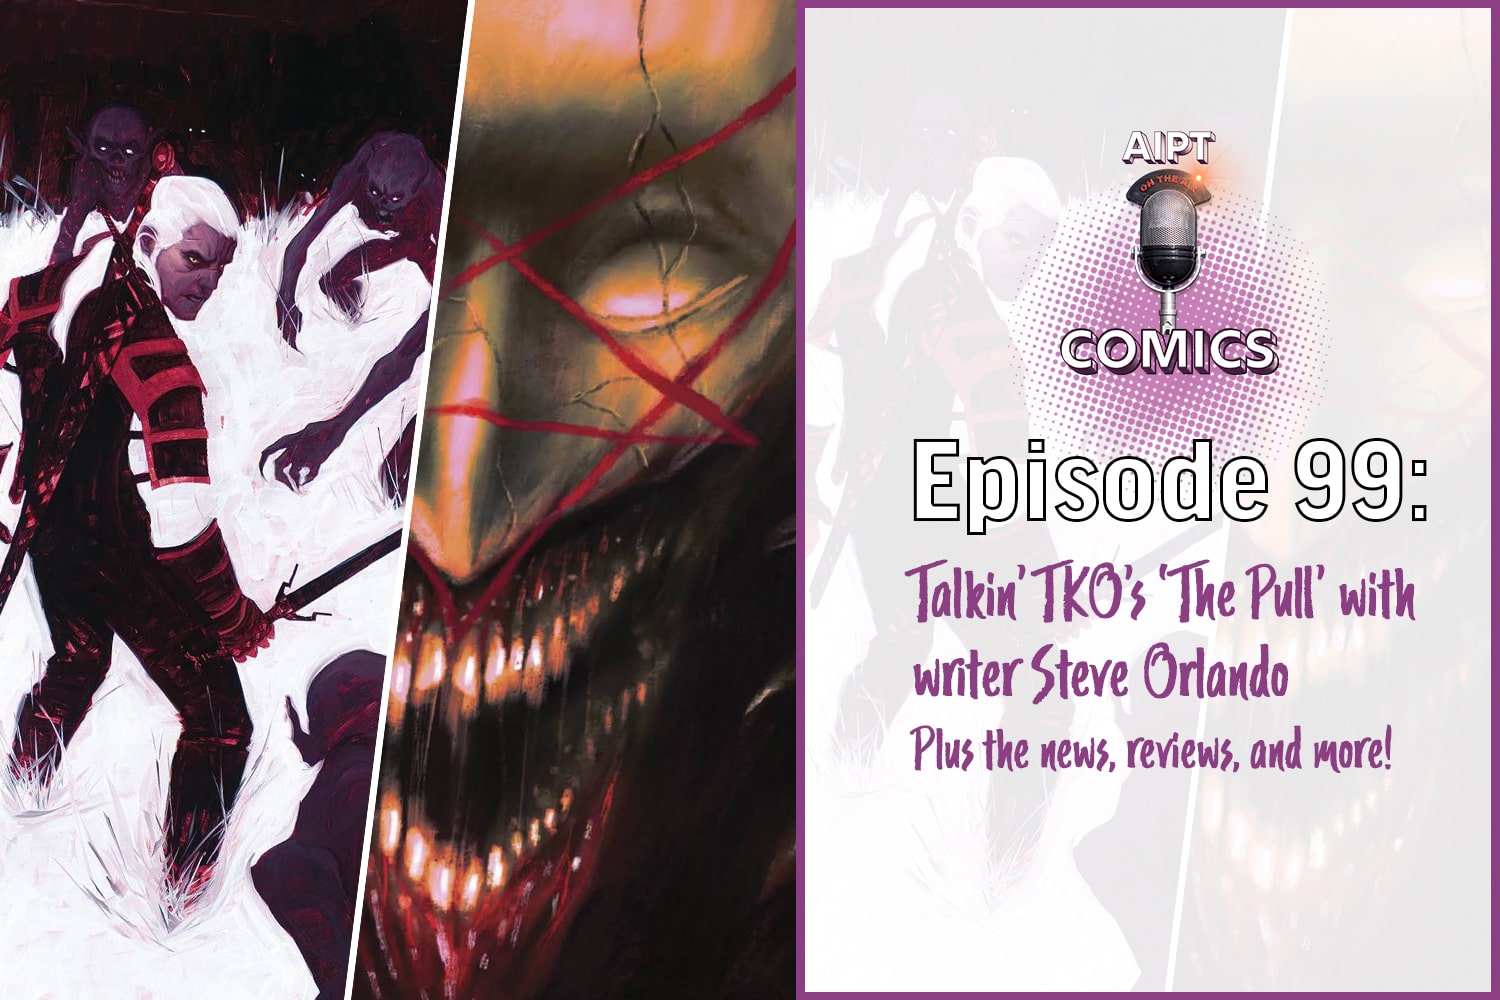 AIPT Comics Podcast Episode 99: Talkin' TKO series 'The Pull' with writer Steve Orlando